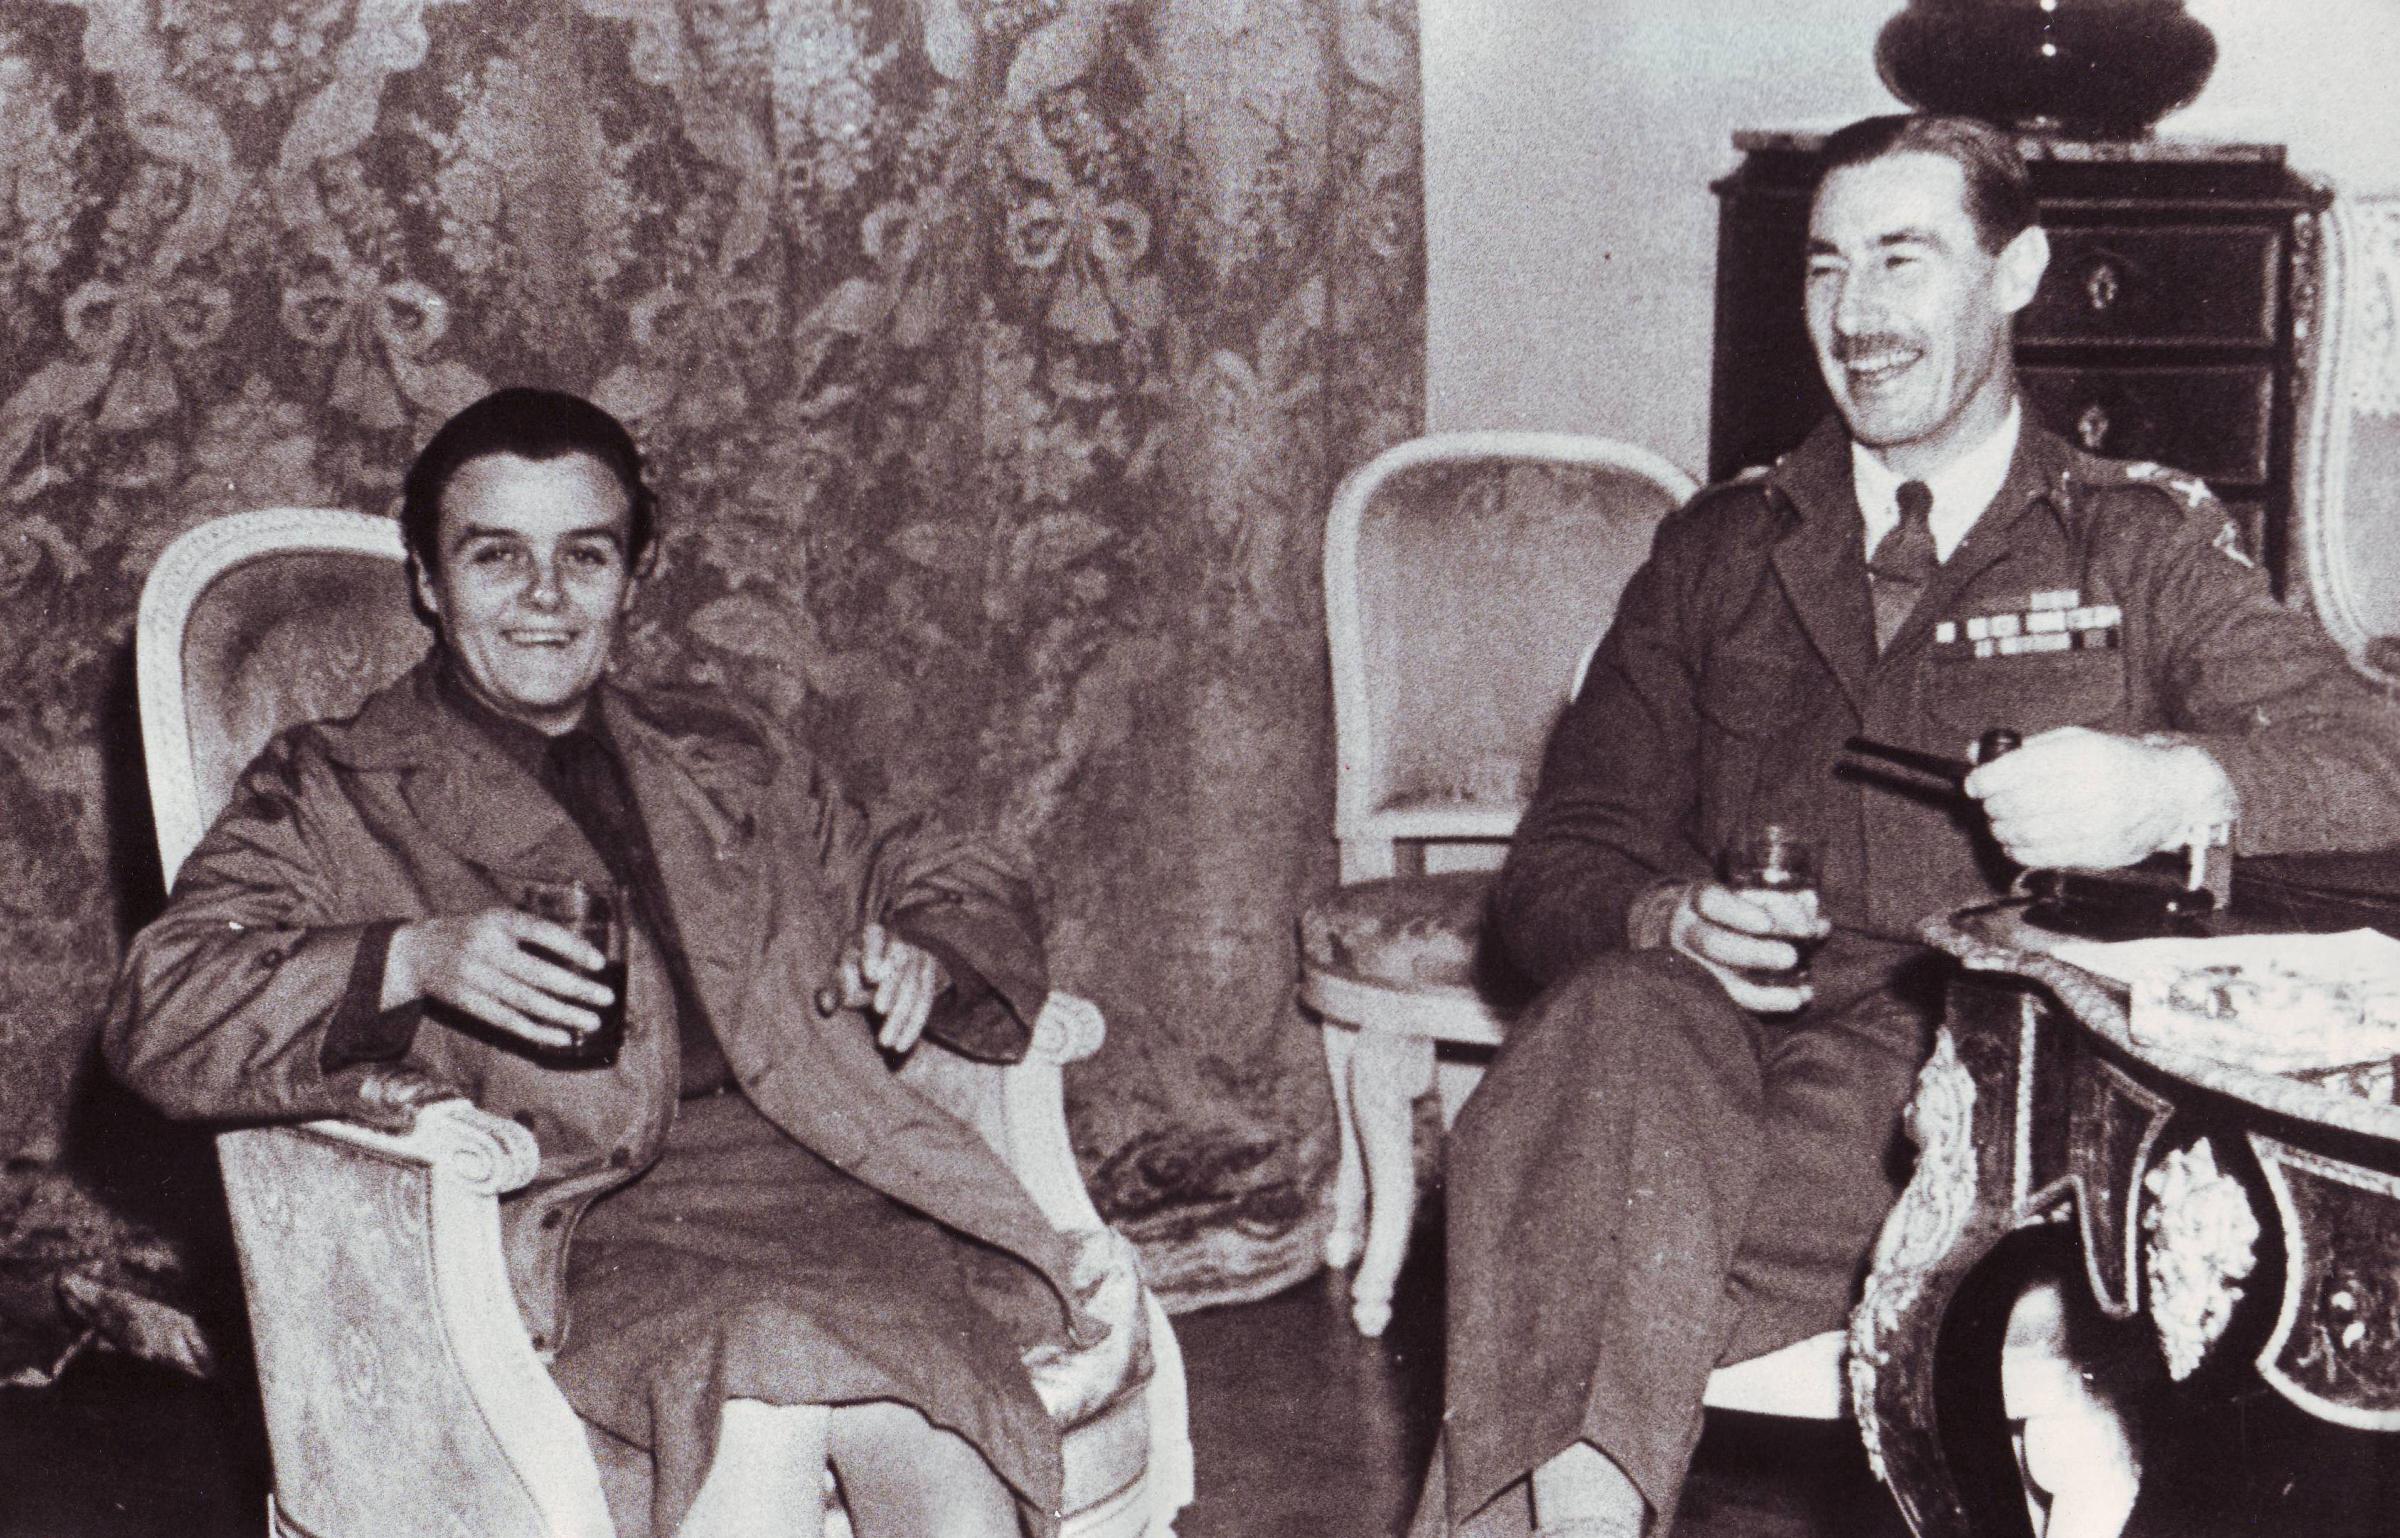 Clare Hollingworth with a military figure lounging in arm chair, likely towards the end of World War II.